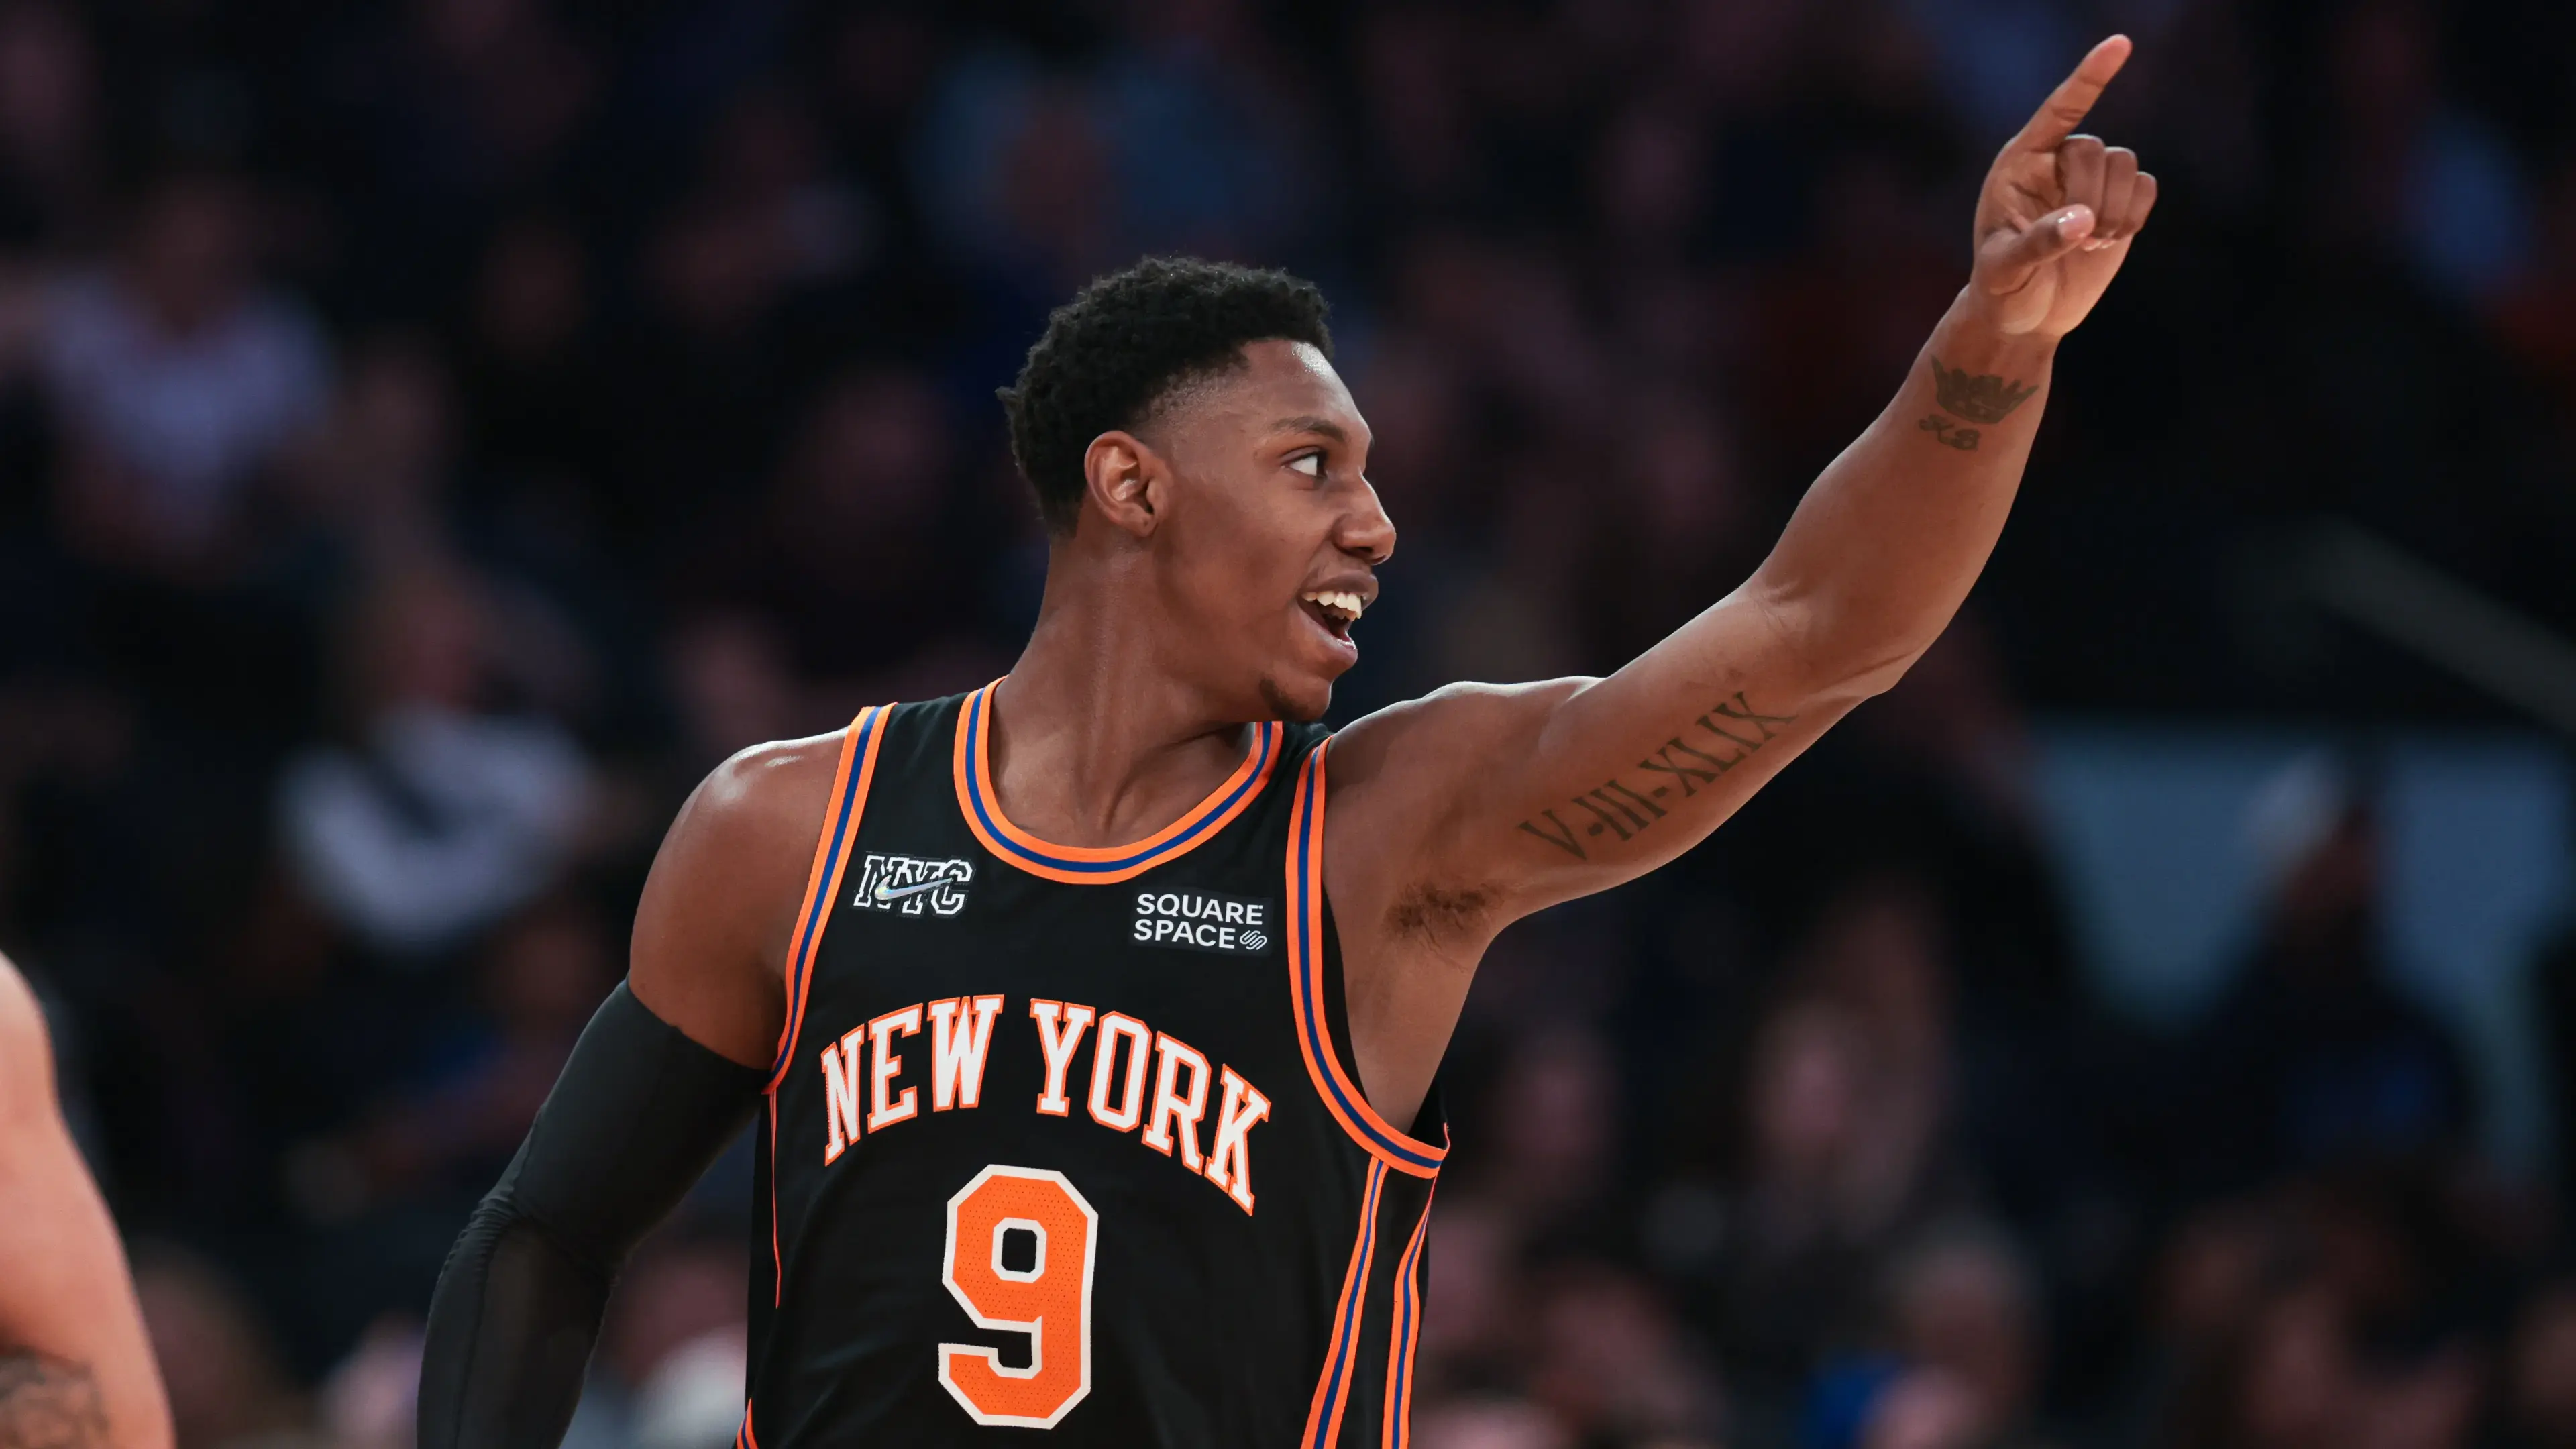 Feb 25, 2022; New York, New York, USA; New York Knicks guard RJ Barrett (9) reacts after a basket against the Miami Heat during the first half at Madison Square Garden. / Vincent Carchietta-USA TODAY Sports